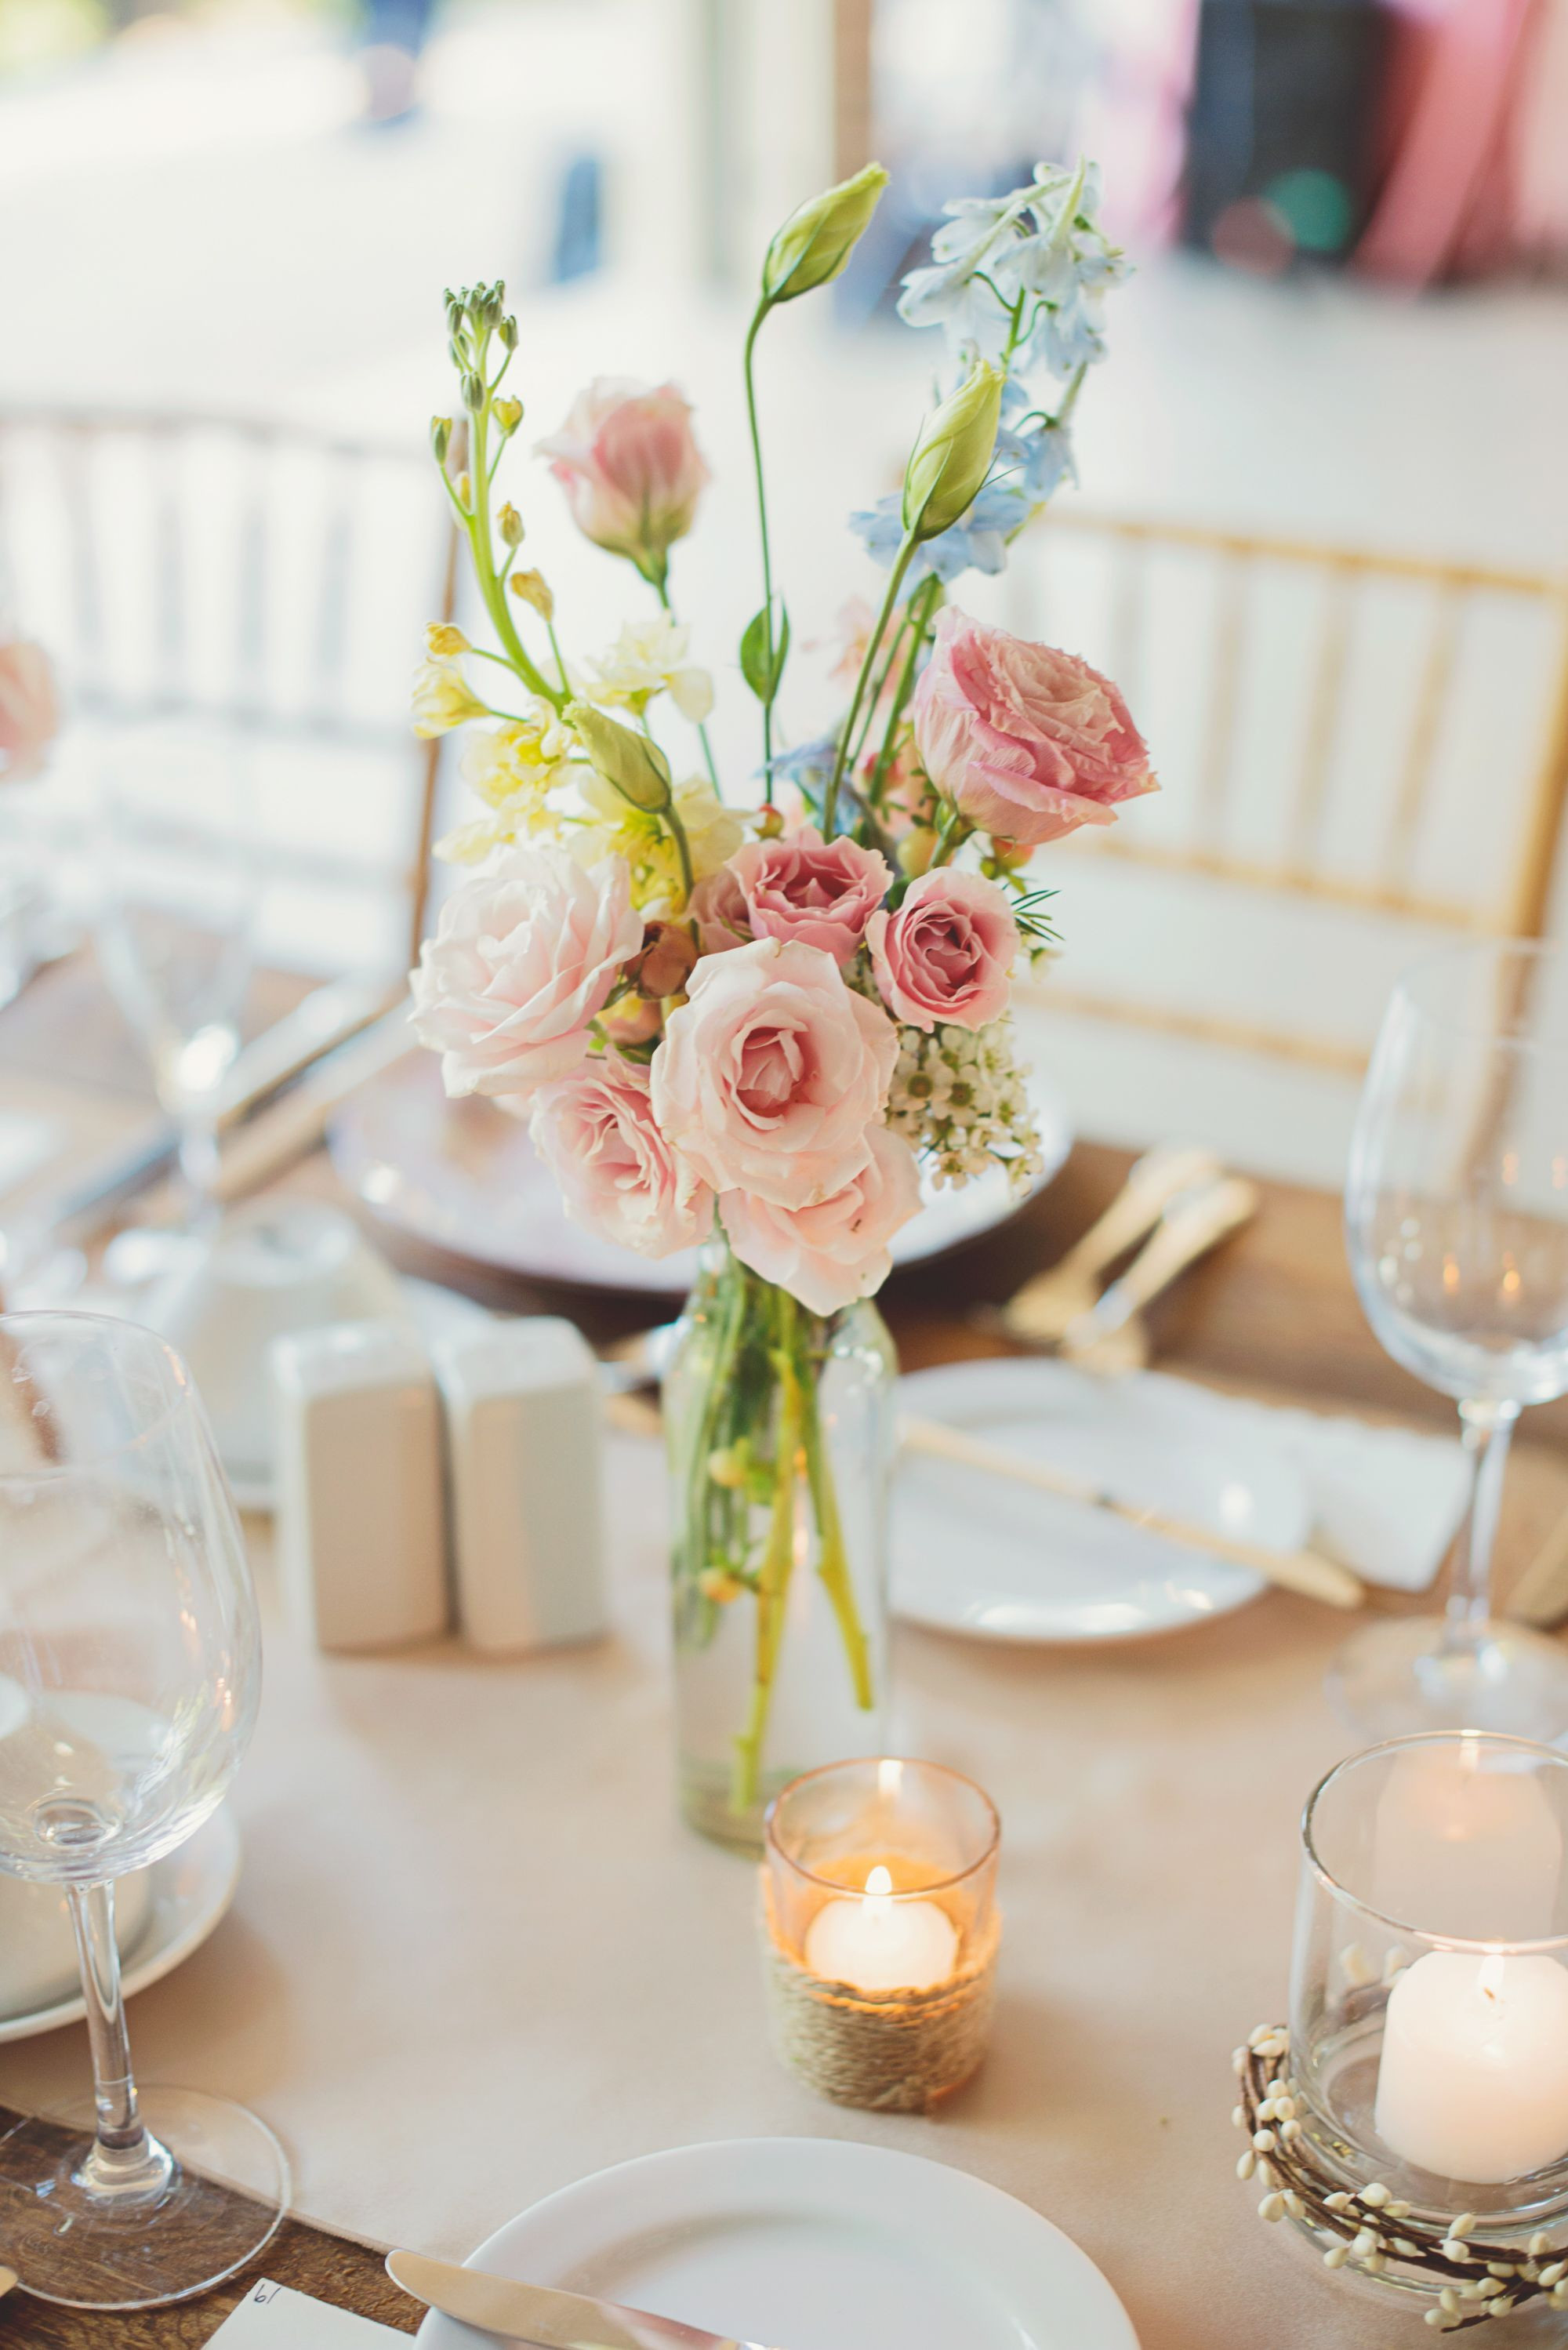 20 Recommended Bud Vase Centerpieces 2024 free download bud vase centerpieces of pink floral centerpiece in bud vase rachelles wedding ideas pertaining to pink floral centerpiece in bud vase